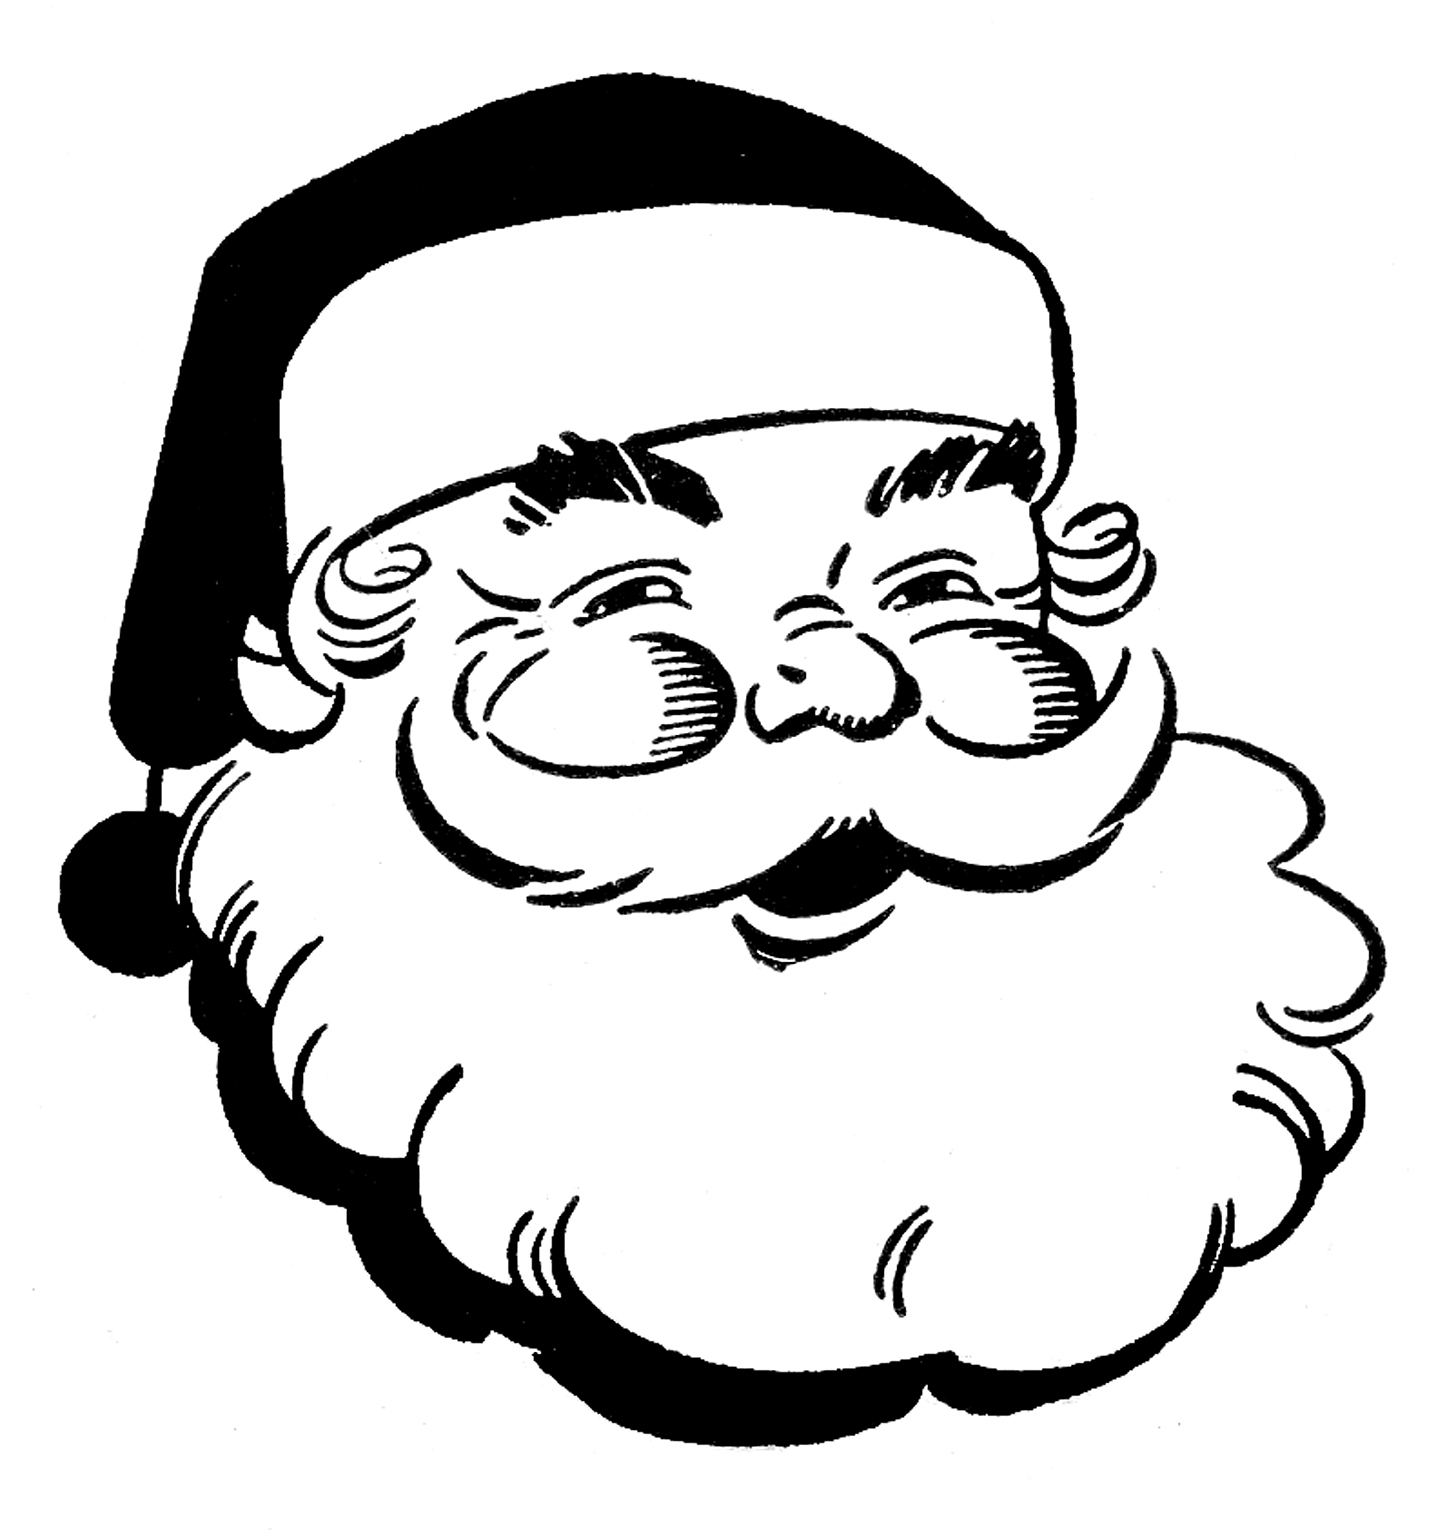 Free Christmas Clip Art Borders Black And White - www.